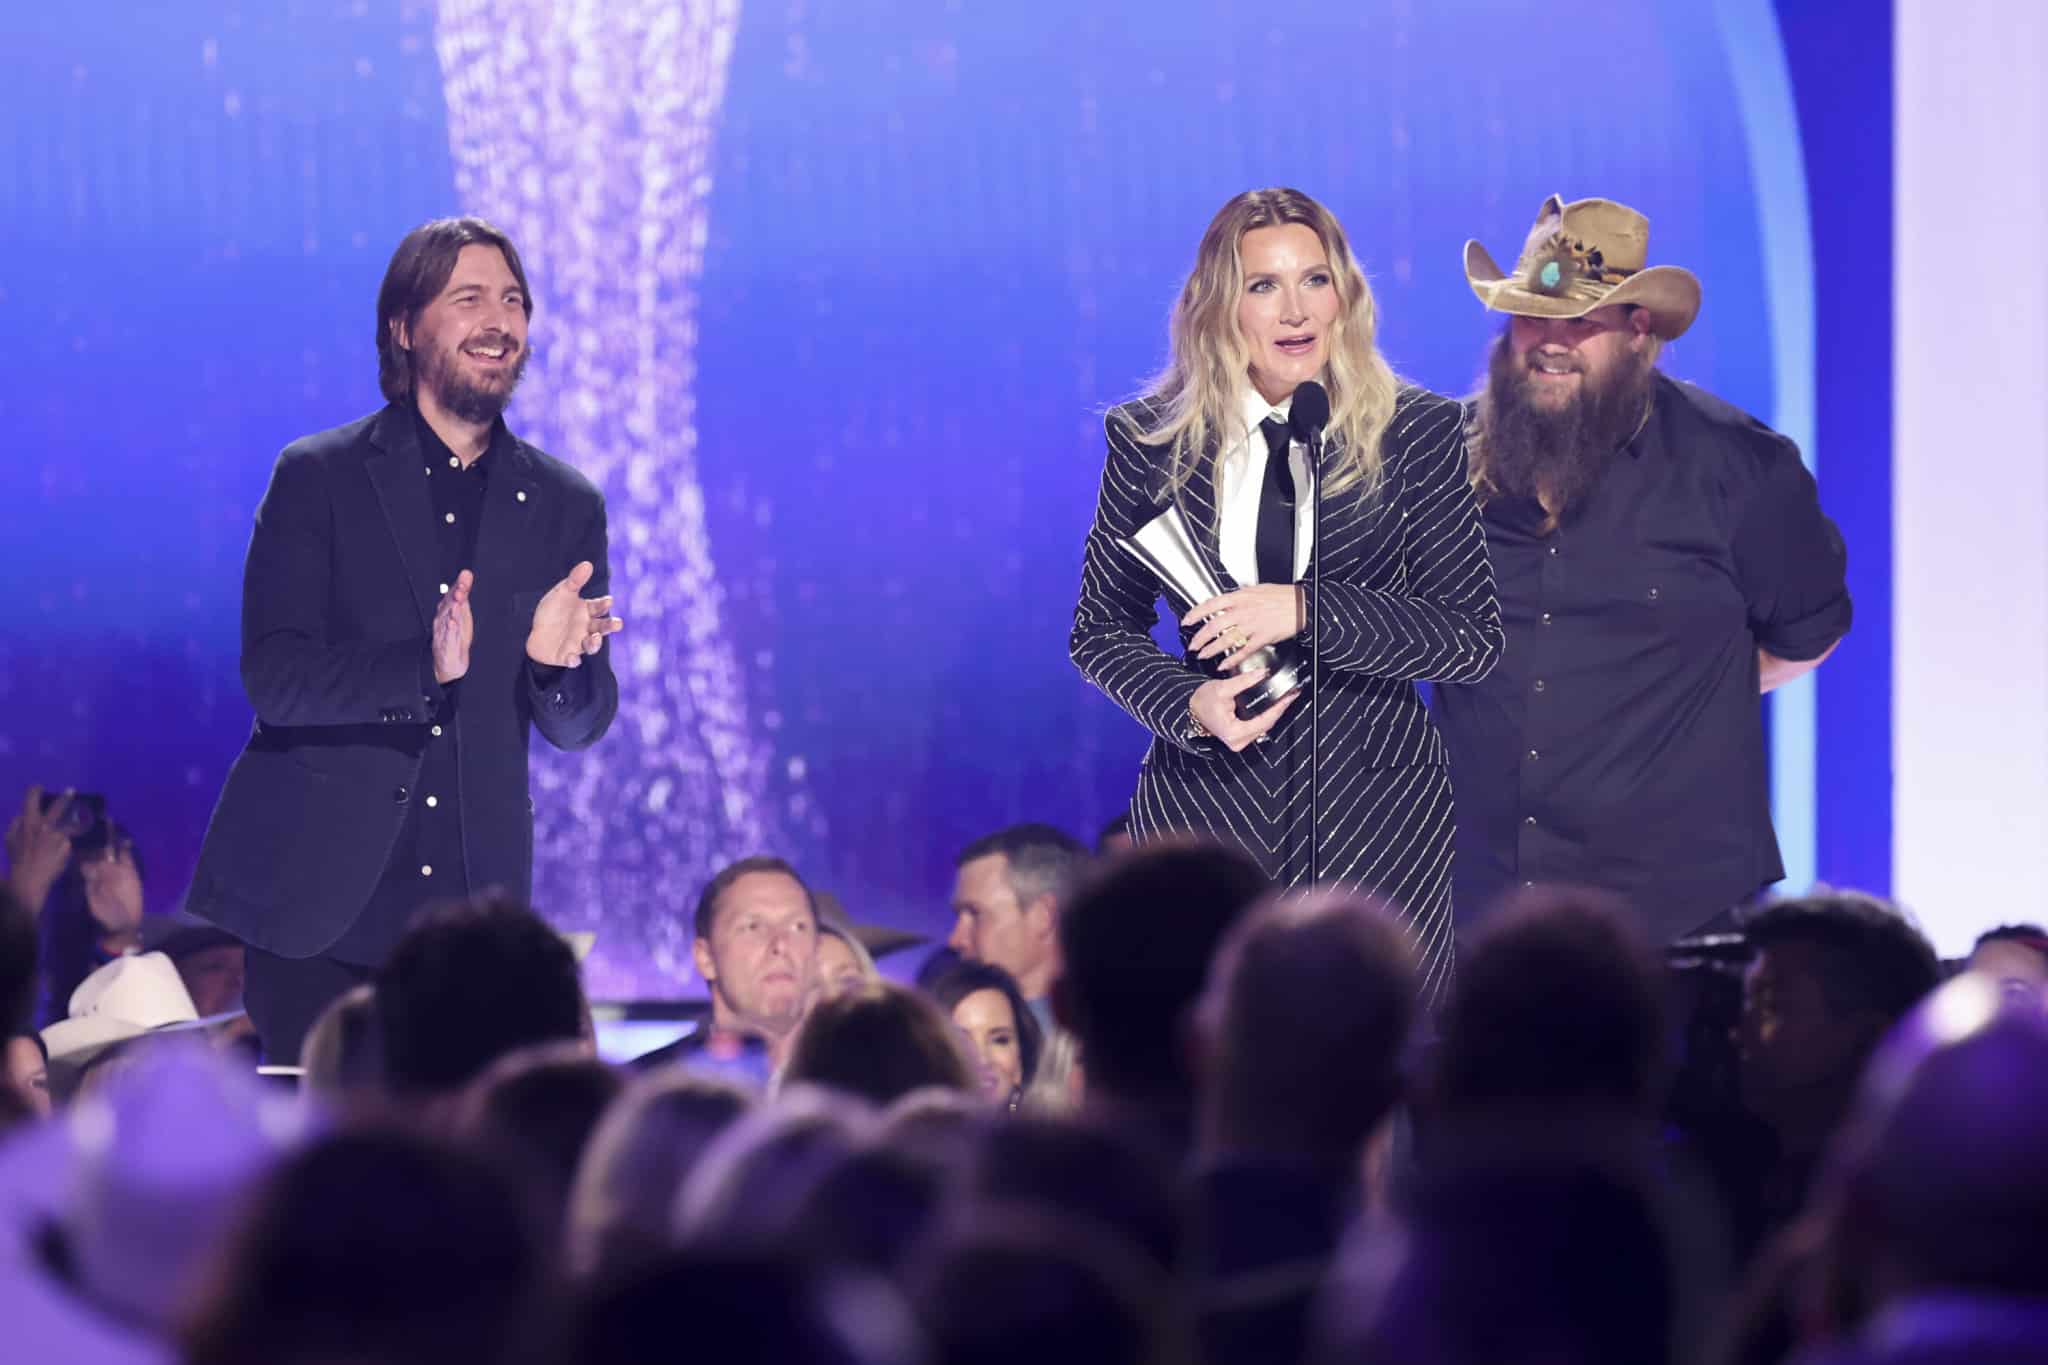 Morgane Stapleton accepts her first ACM Award (for Album of the Year) while co-producers Chris Stapleton and Dave Cobb look on